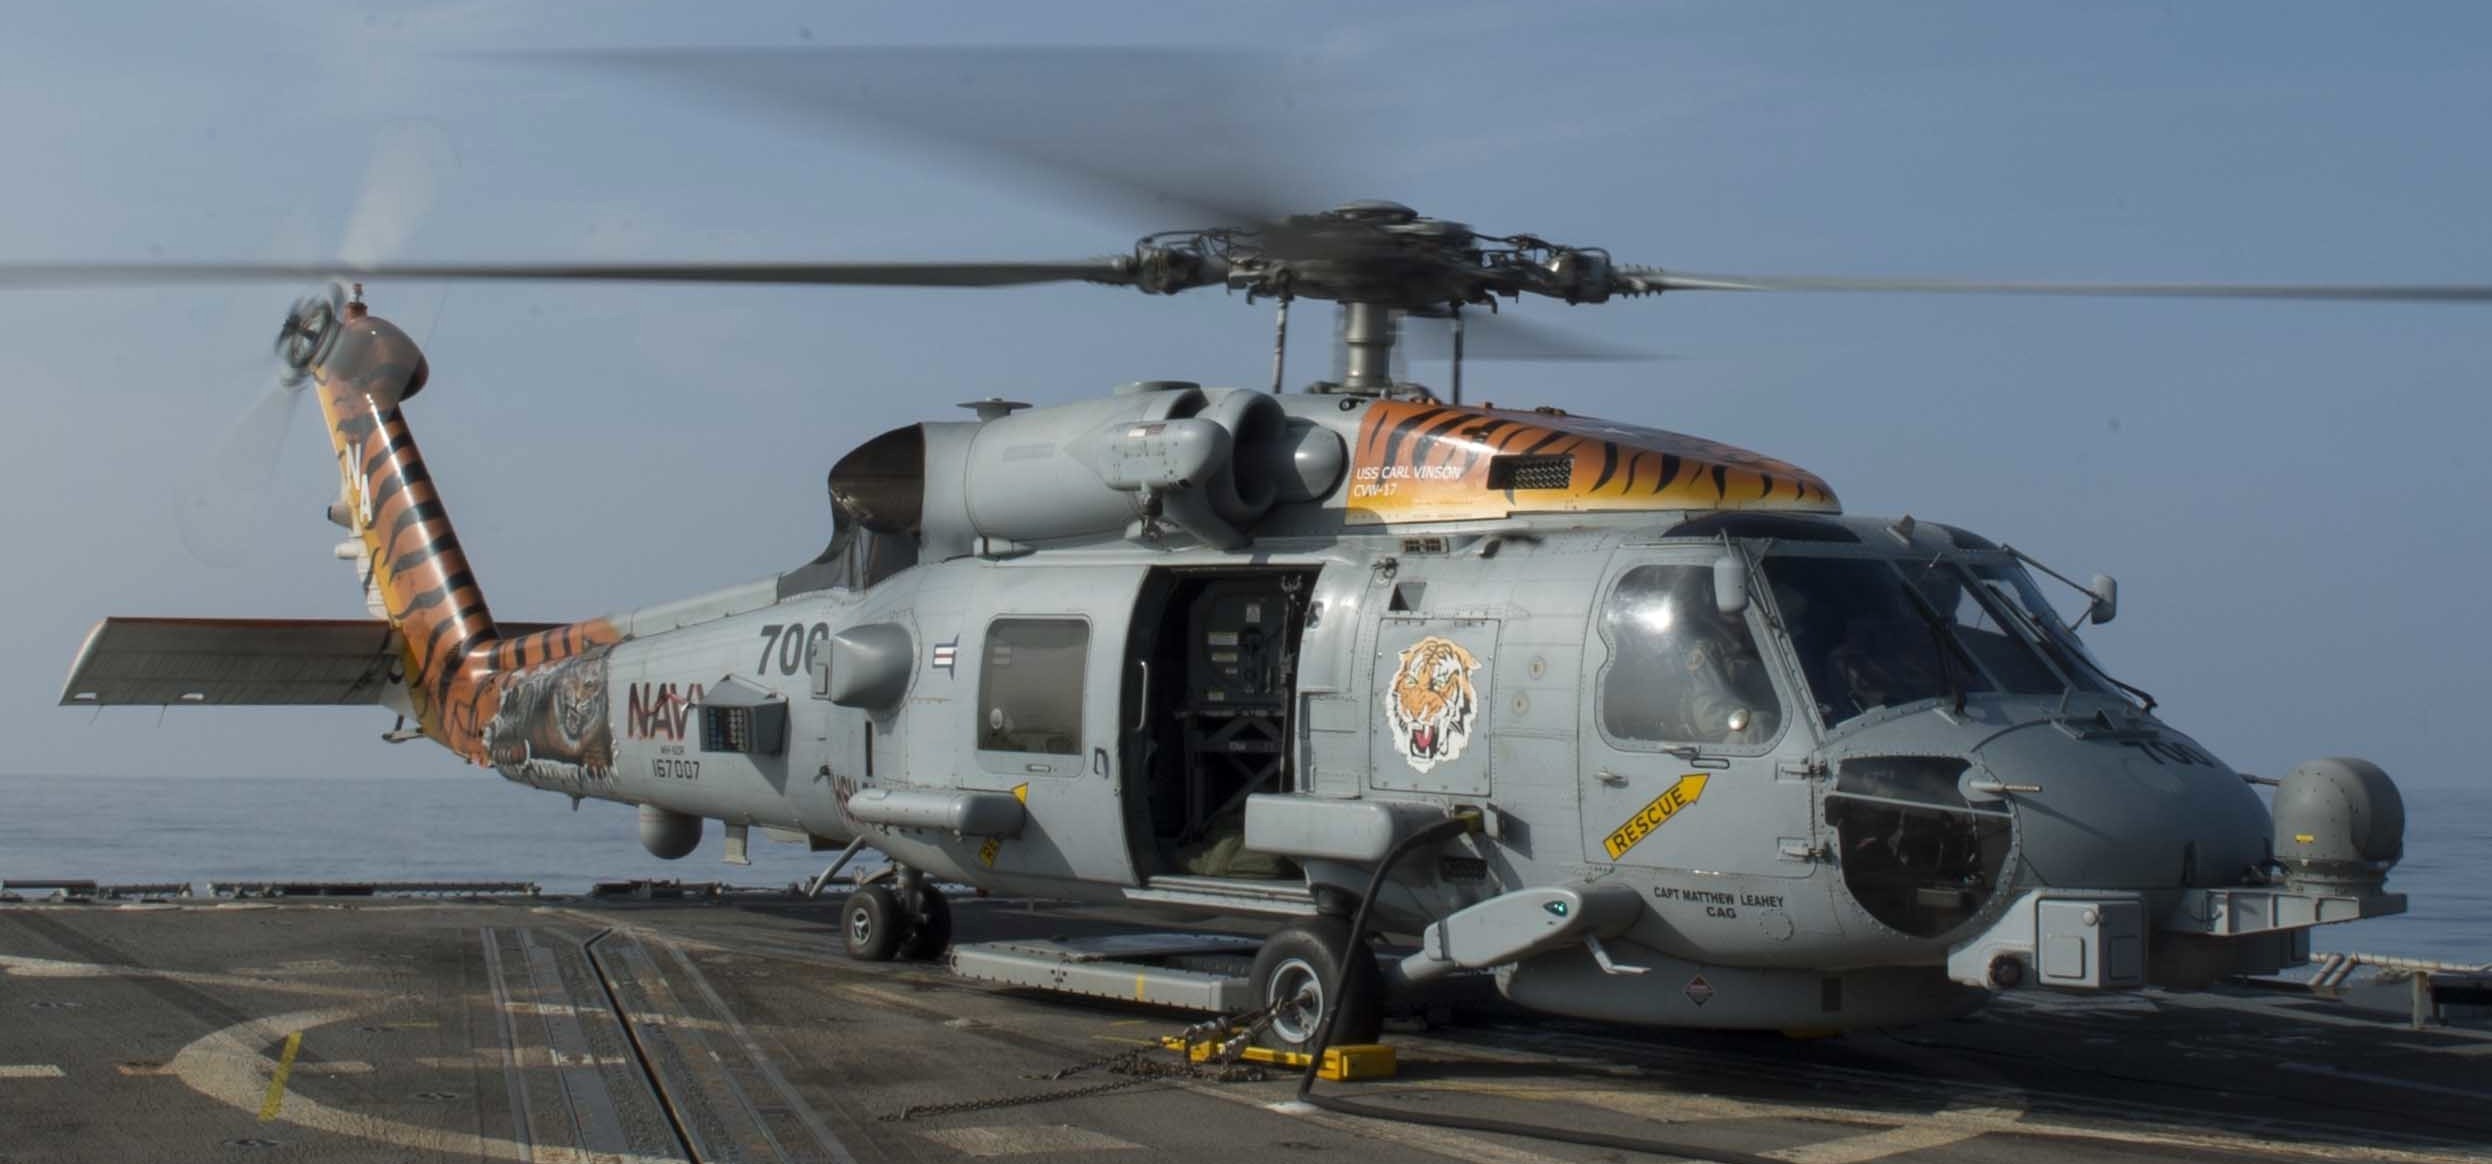 hsm-73 battlecats helicopter maritime strike squadron us navy mh-60r seahawk 2015 30